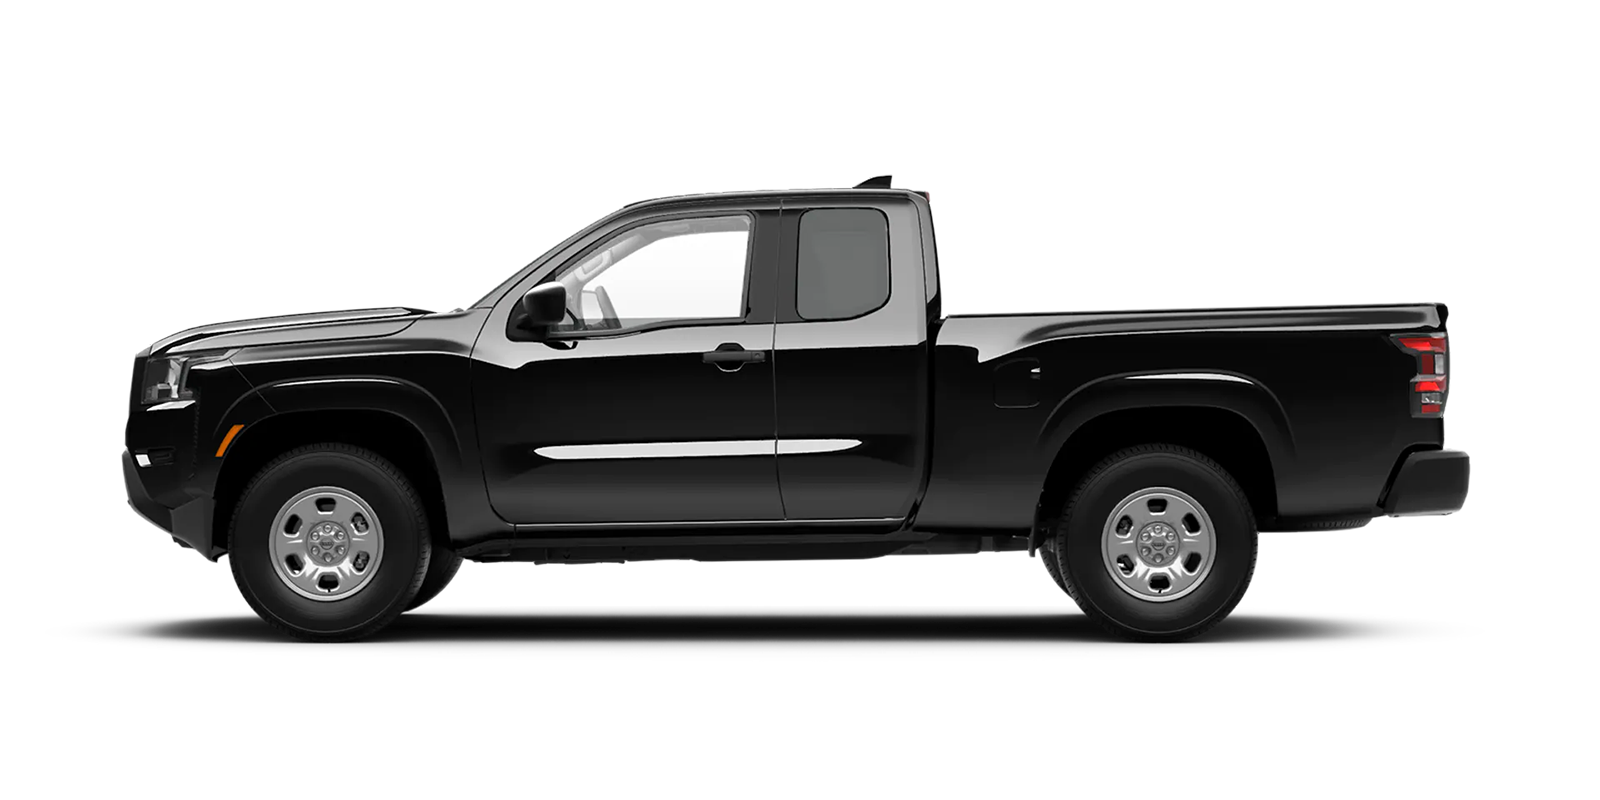 2022 Frontier King Cab S 4x2 in Super Black | Nissan of Pittsfield in Pittsfield MA